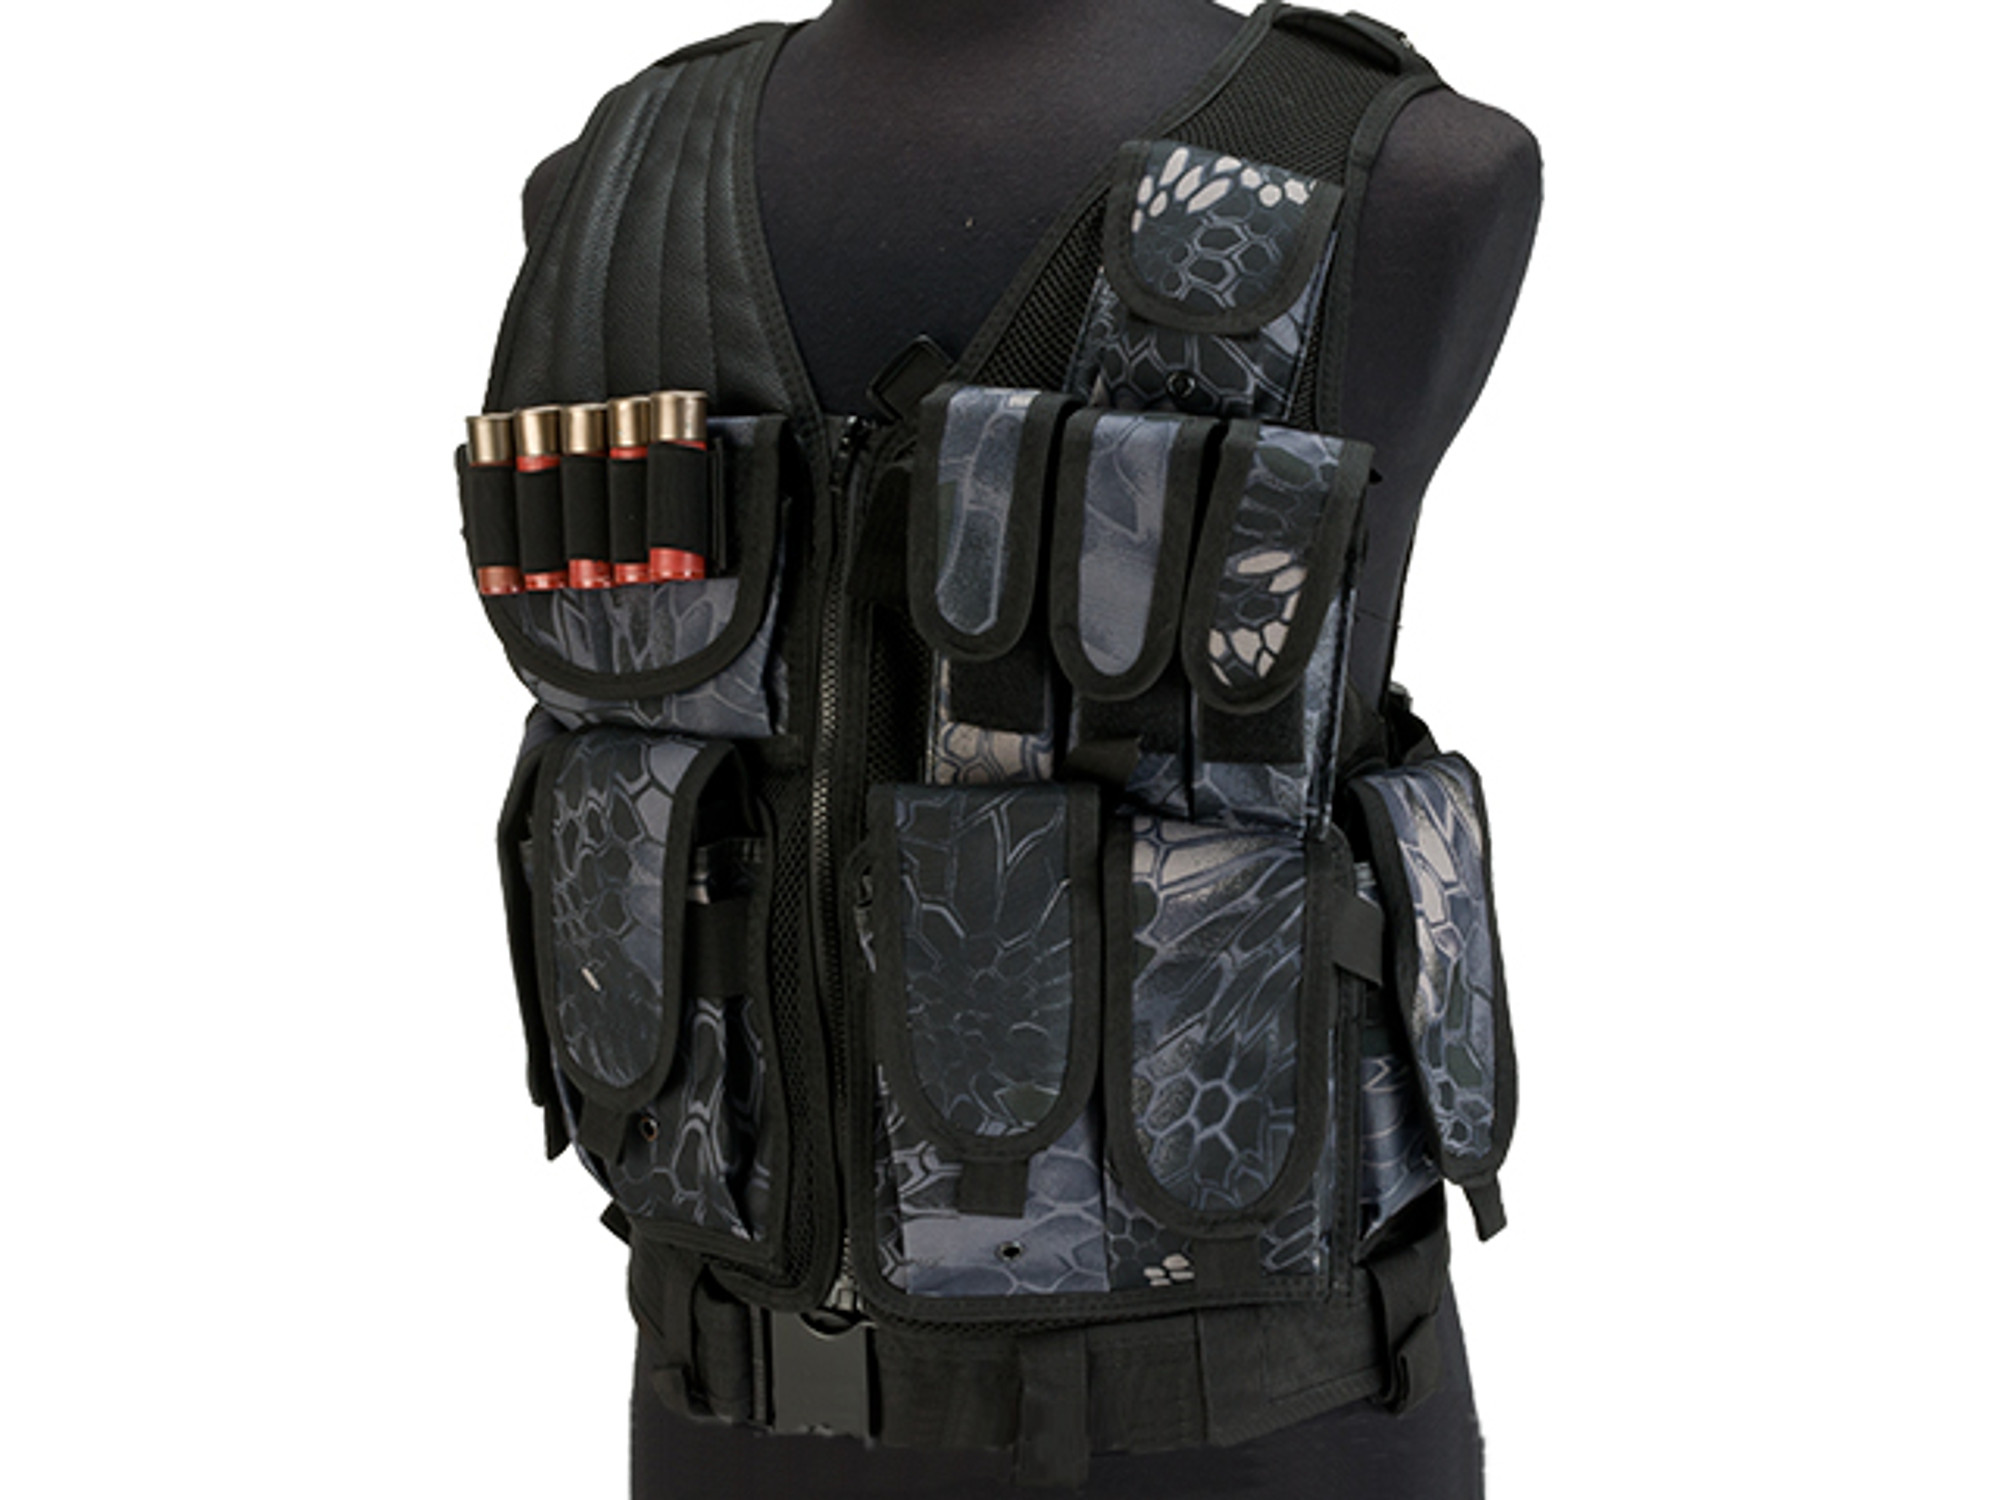 Matrix Special Force Cross Draw Tactical Vest w/ Built In Holster & Mag Pouches - Urban Serpent